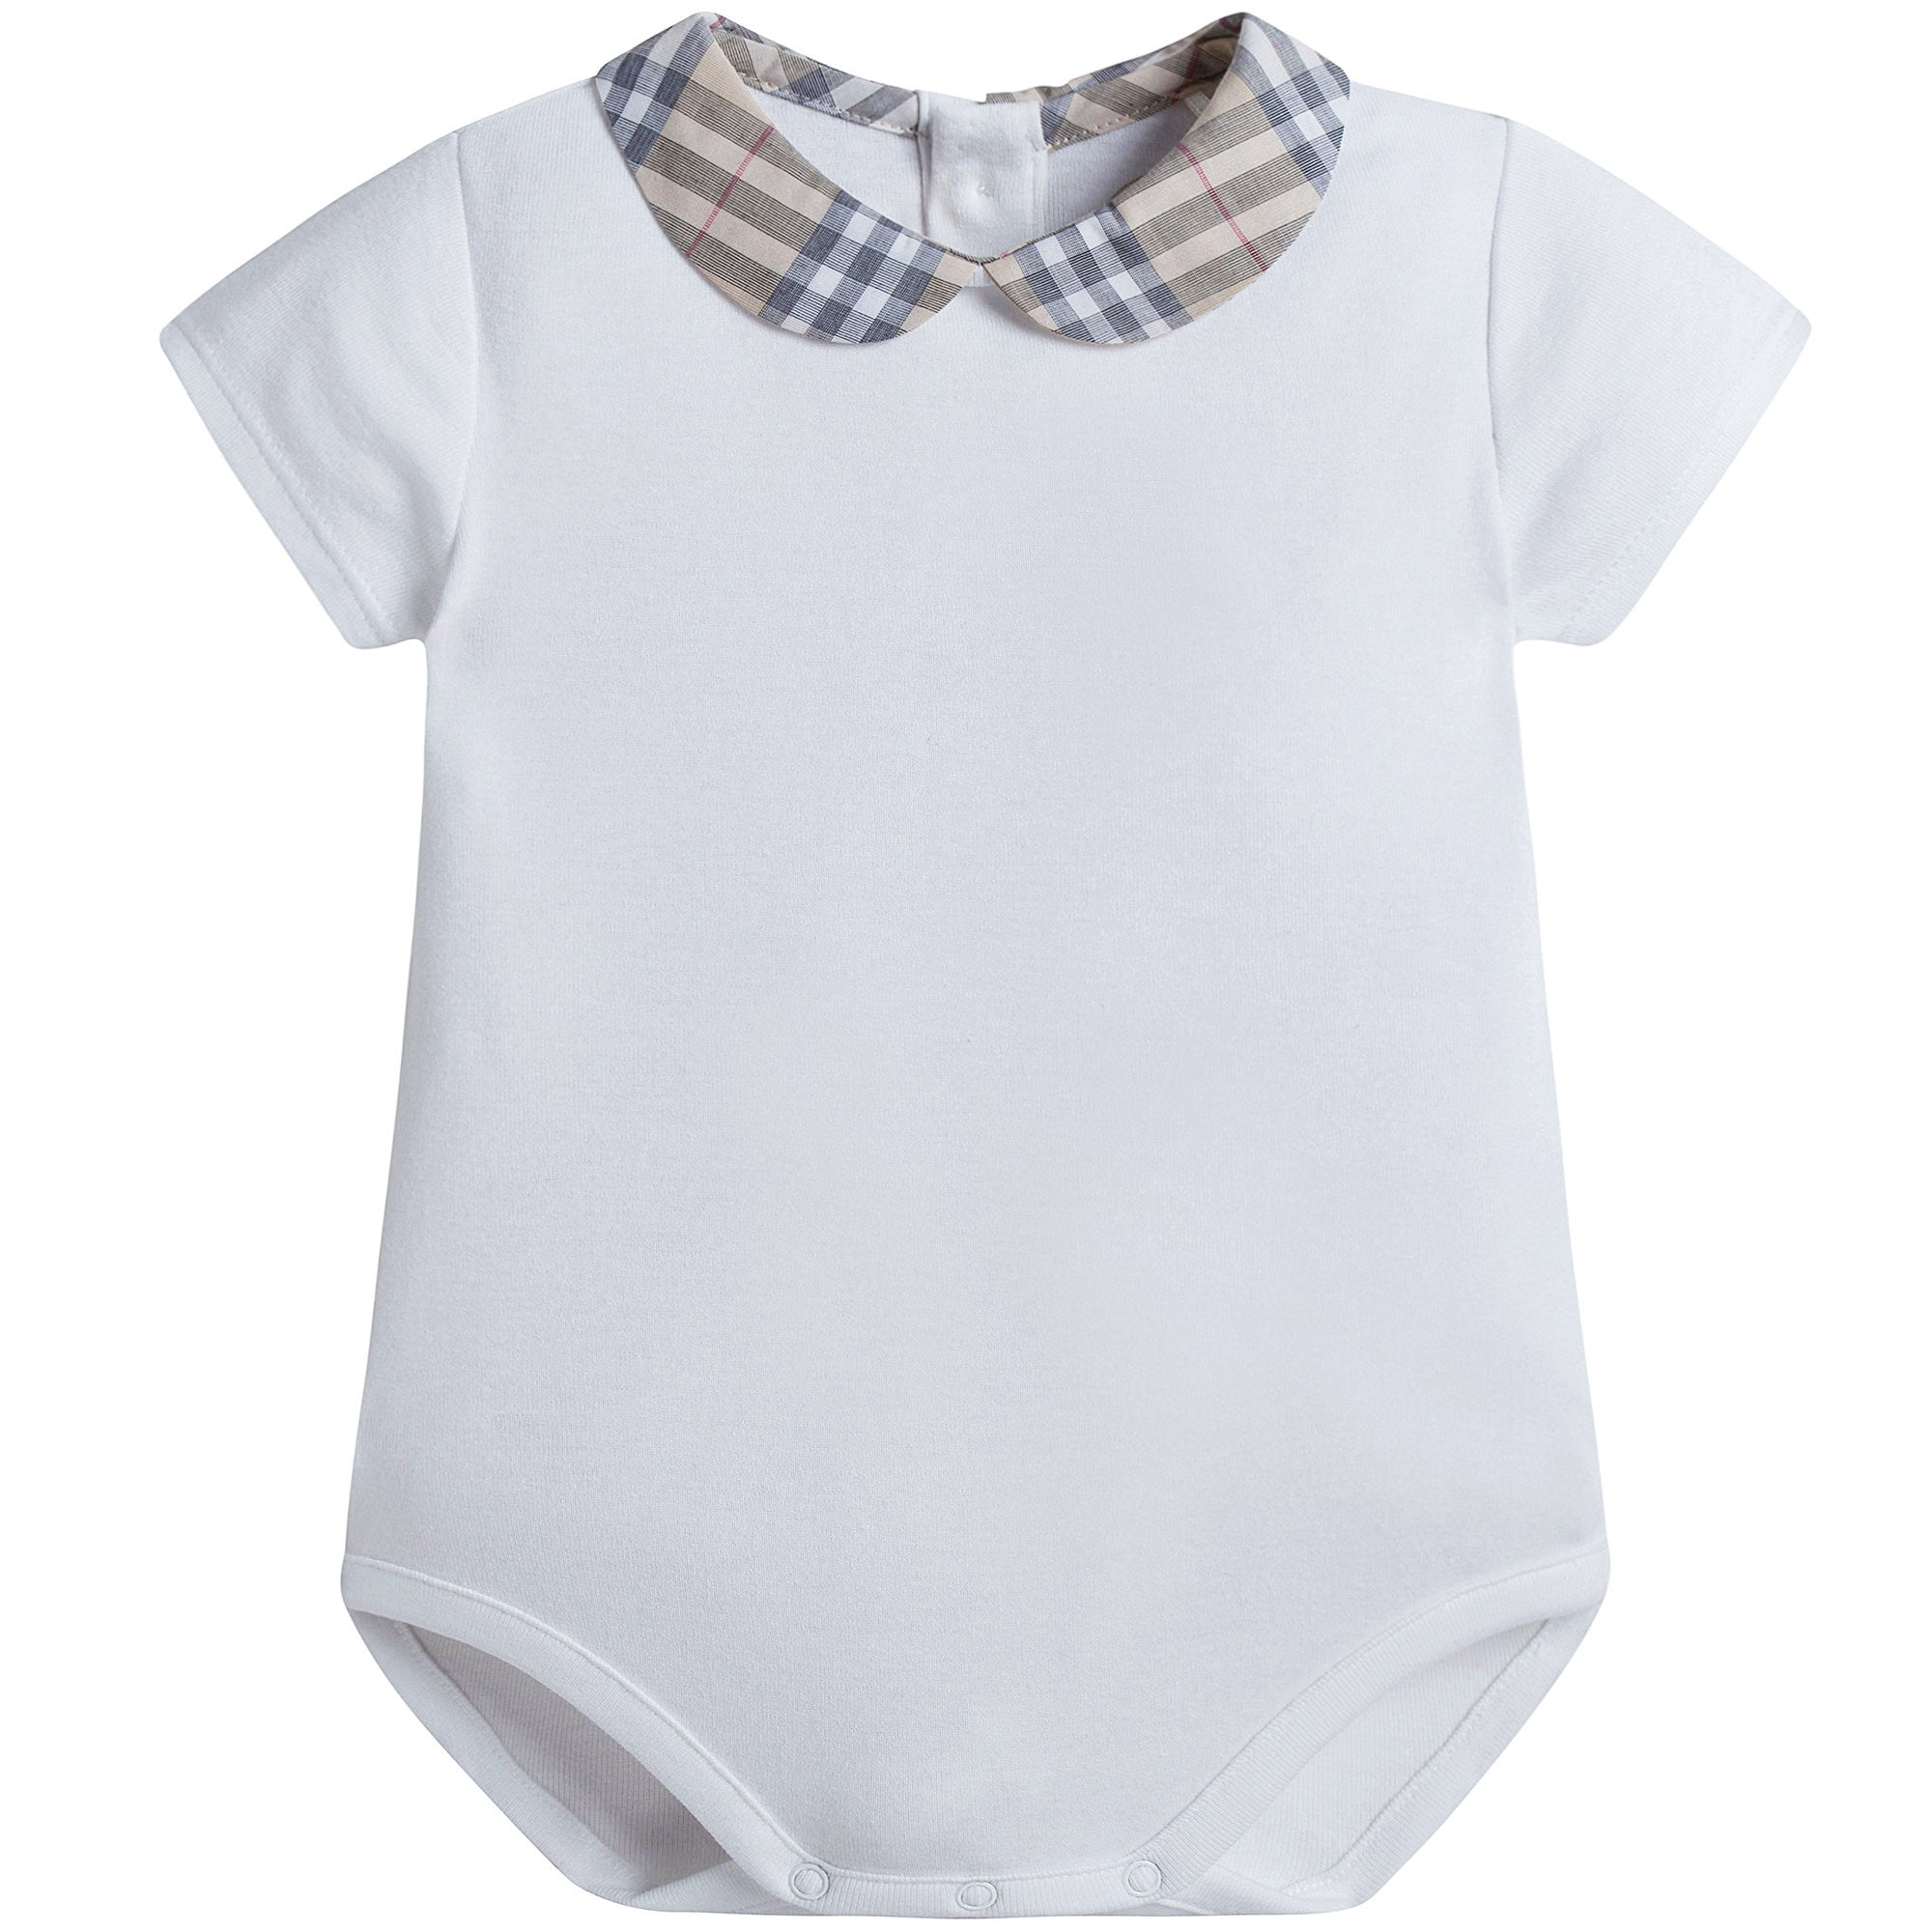 Baby White Cotton Babysuit With Check Collar